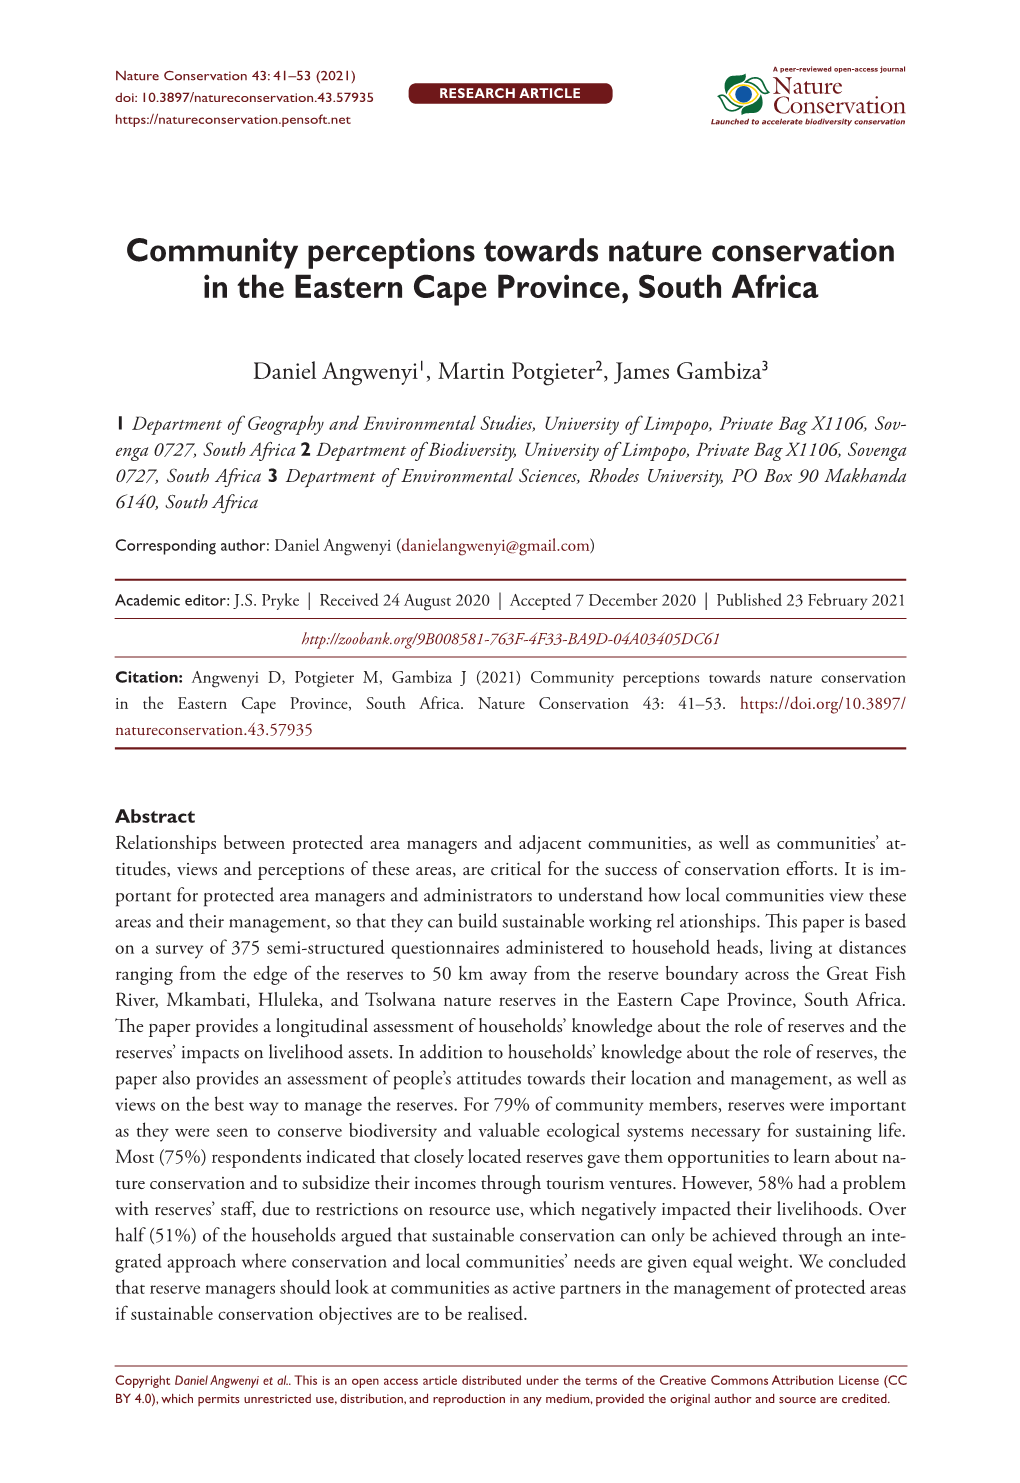 ﻿Community Perceptions Towards Nature Conservation in the Eastern